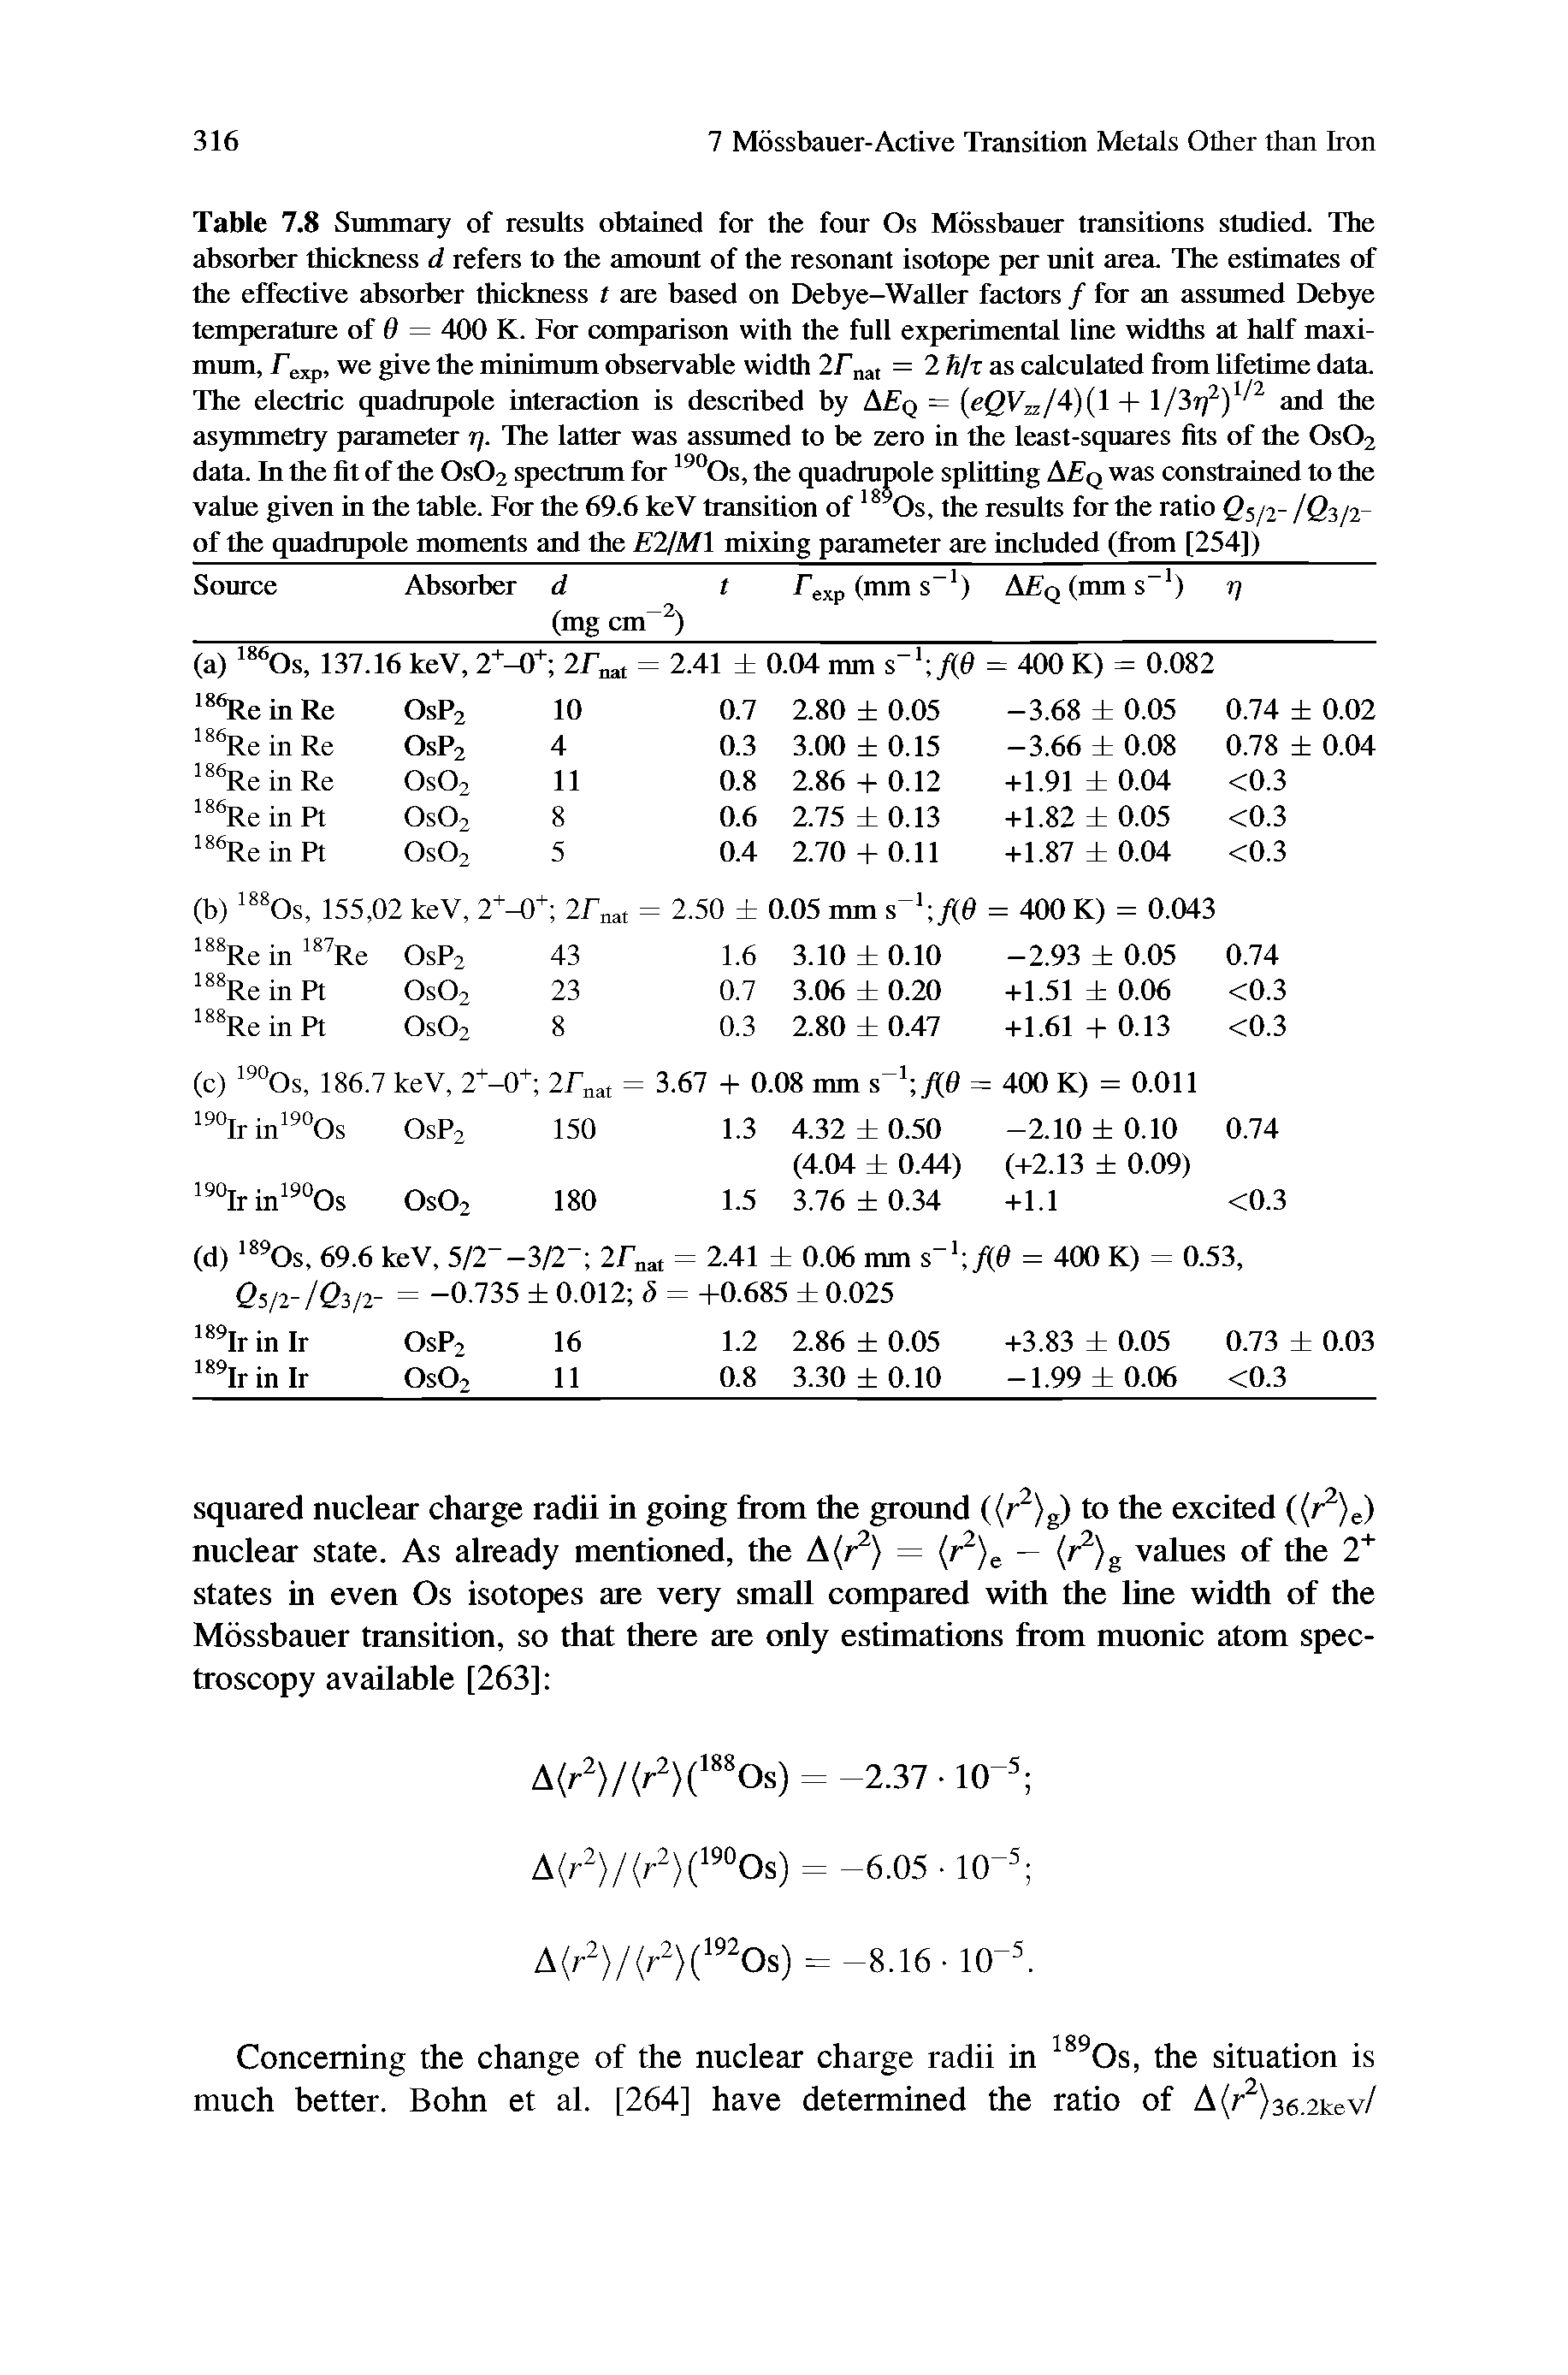 Table 7.8 Summary of results obtained for the four Os Mossbauer transitions studied. The absorber thickness d refers to the amount of the resonant isotope per unit area. The estimates of the effective absorber thickness t are based on Debye-Waller factors / for an assumed Debye temperature of 0 = 400 K. For comparison with the full experimental line widths at half maximum, Texp, we give the minimum observable width = 2 S/t as calculated from lifetime data.